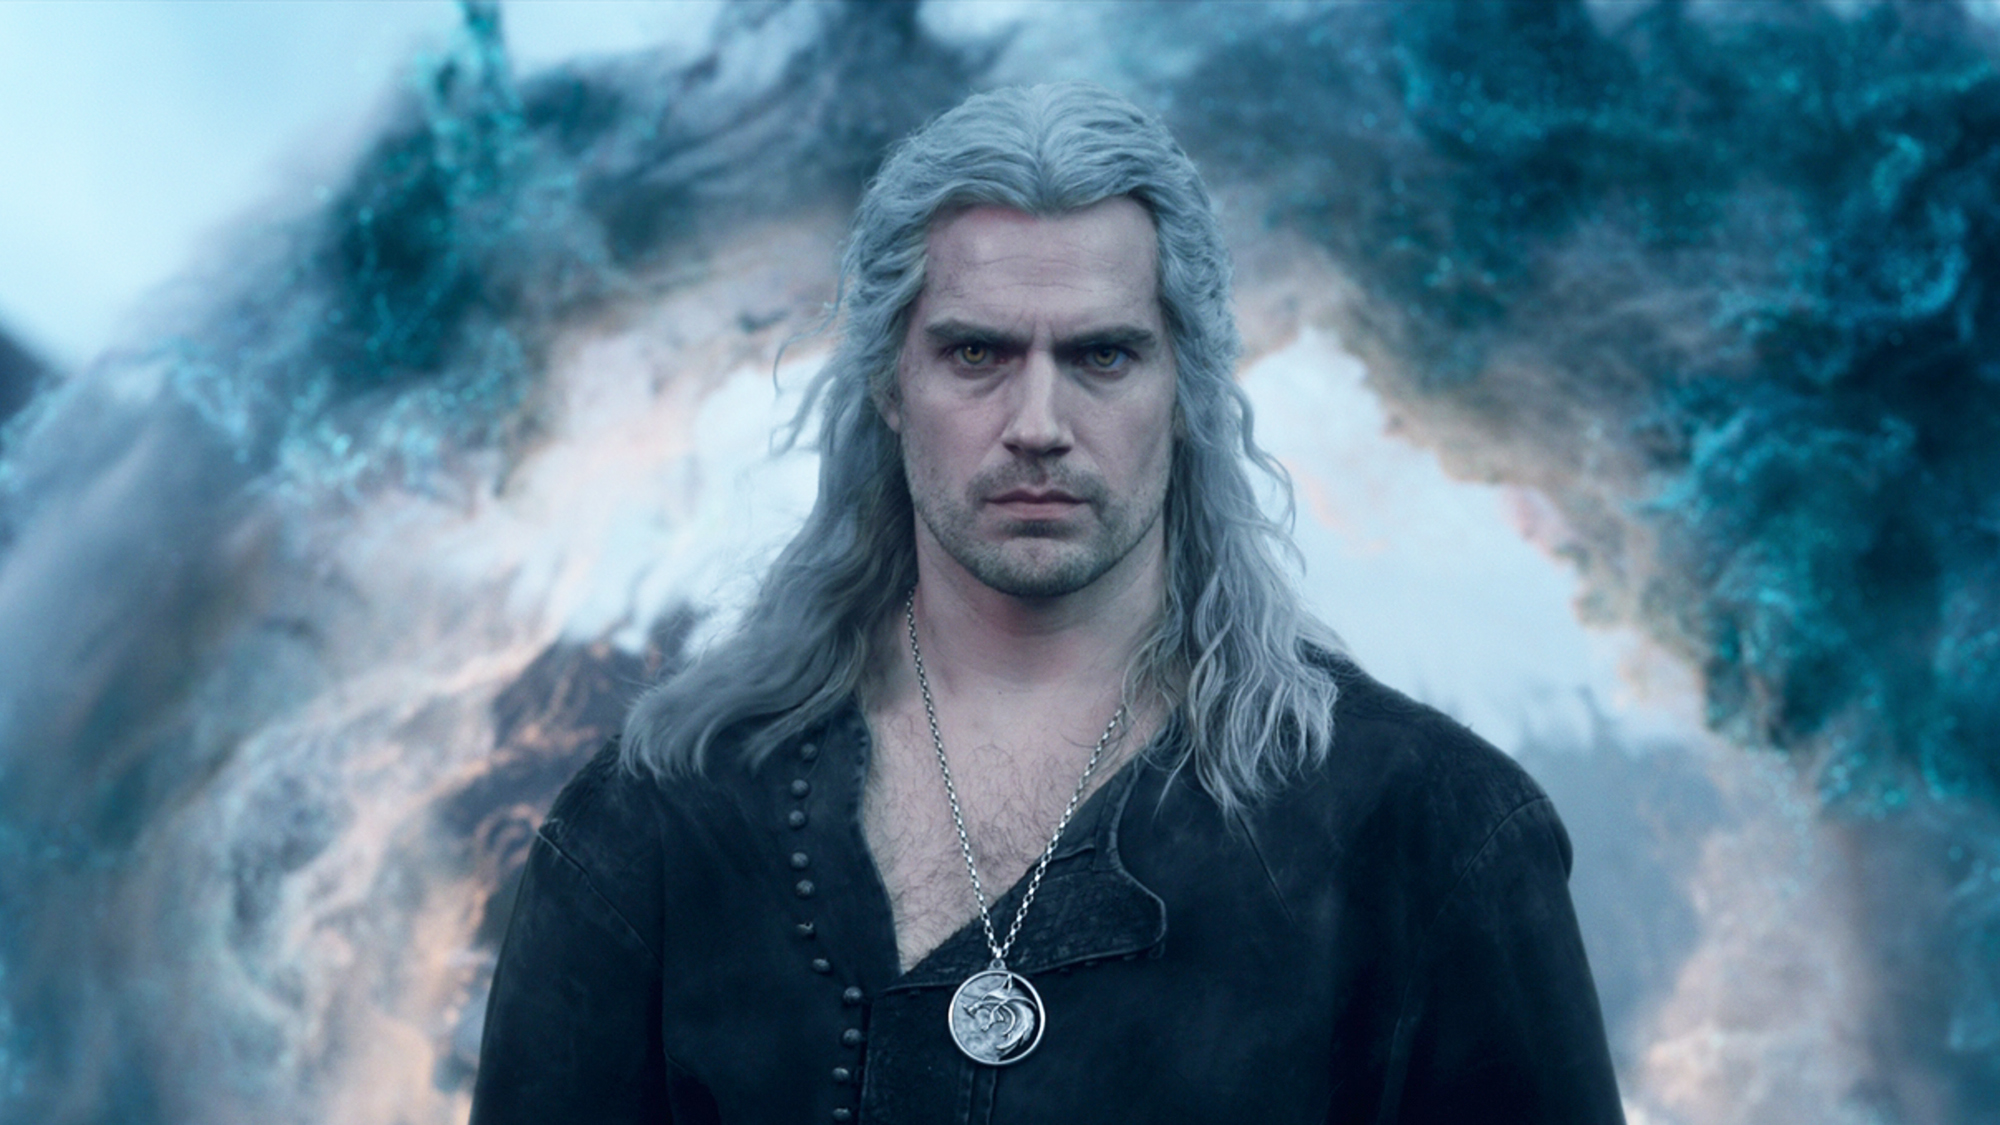 Farewell to Geralt: Henry Cavill Departs The Witcher